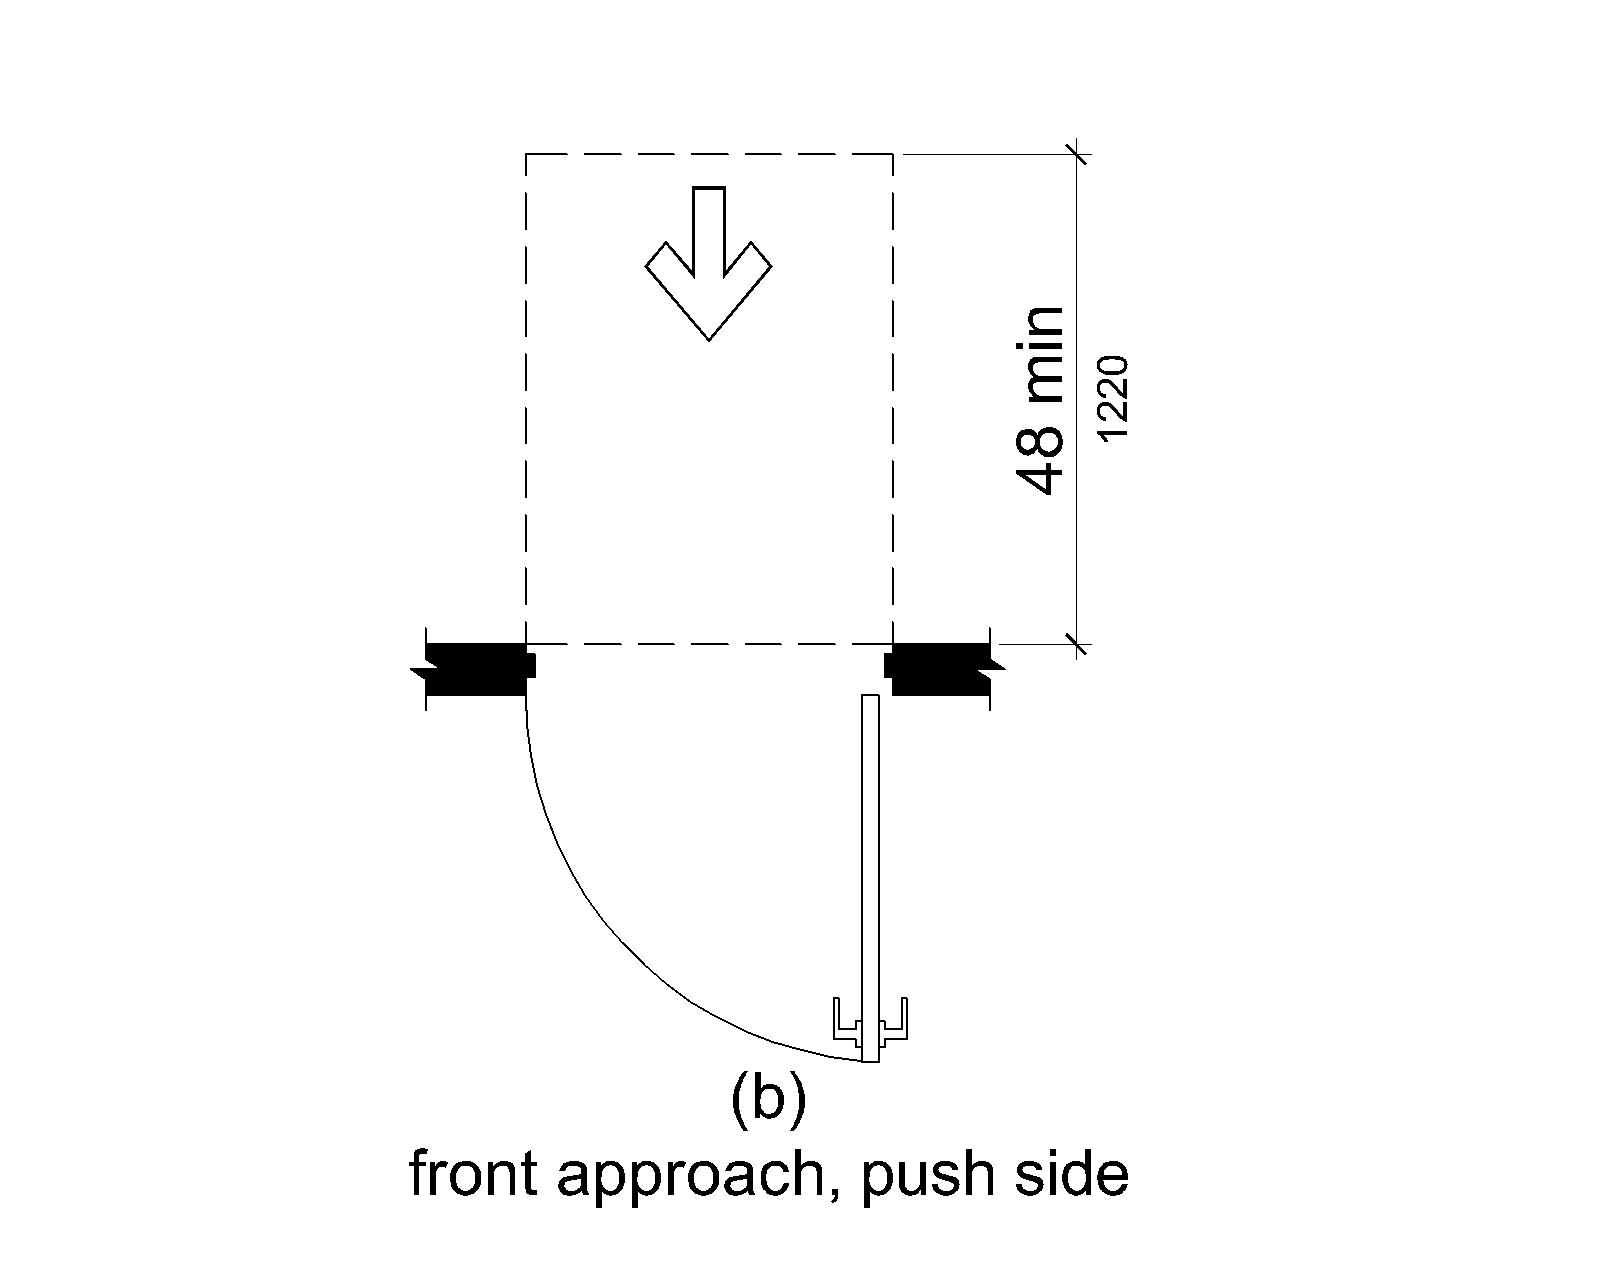 (b) On the push side of doors not equipped with a closer or latch, the maneuvering space is the same width as the door opening and extends 48 inches (1220 mm) minimum perpendicular to the doorway.